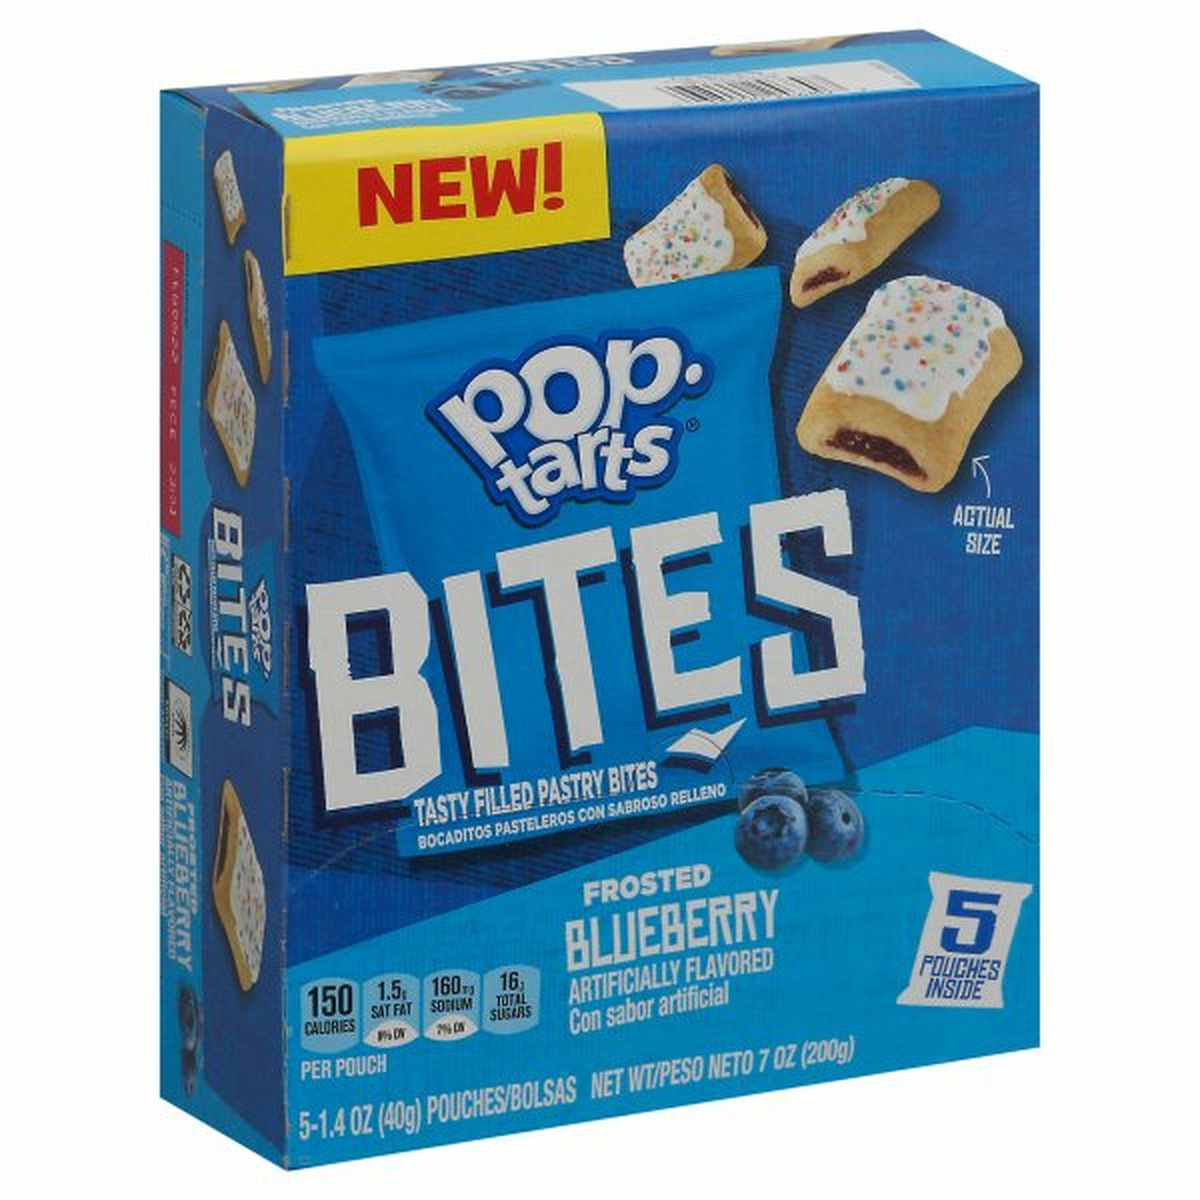 Calories in Kellogg's Pop-Tarts Bites Bites, Frosted Blueberry